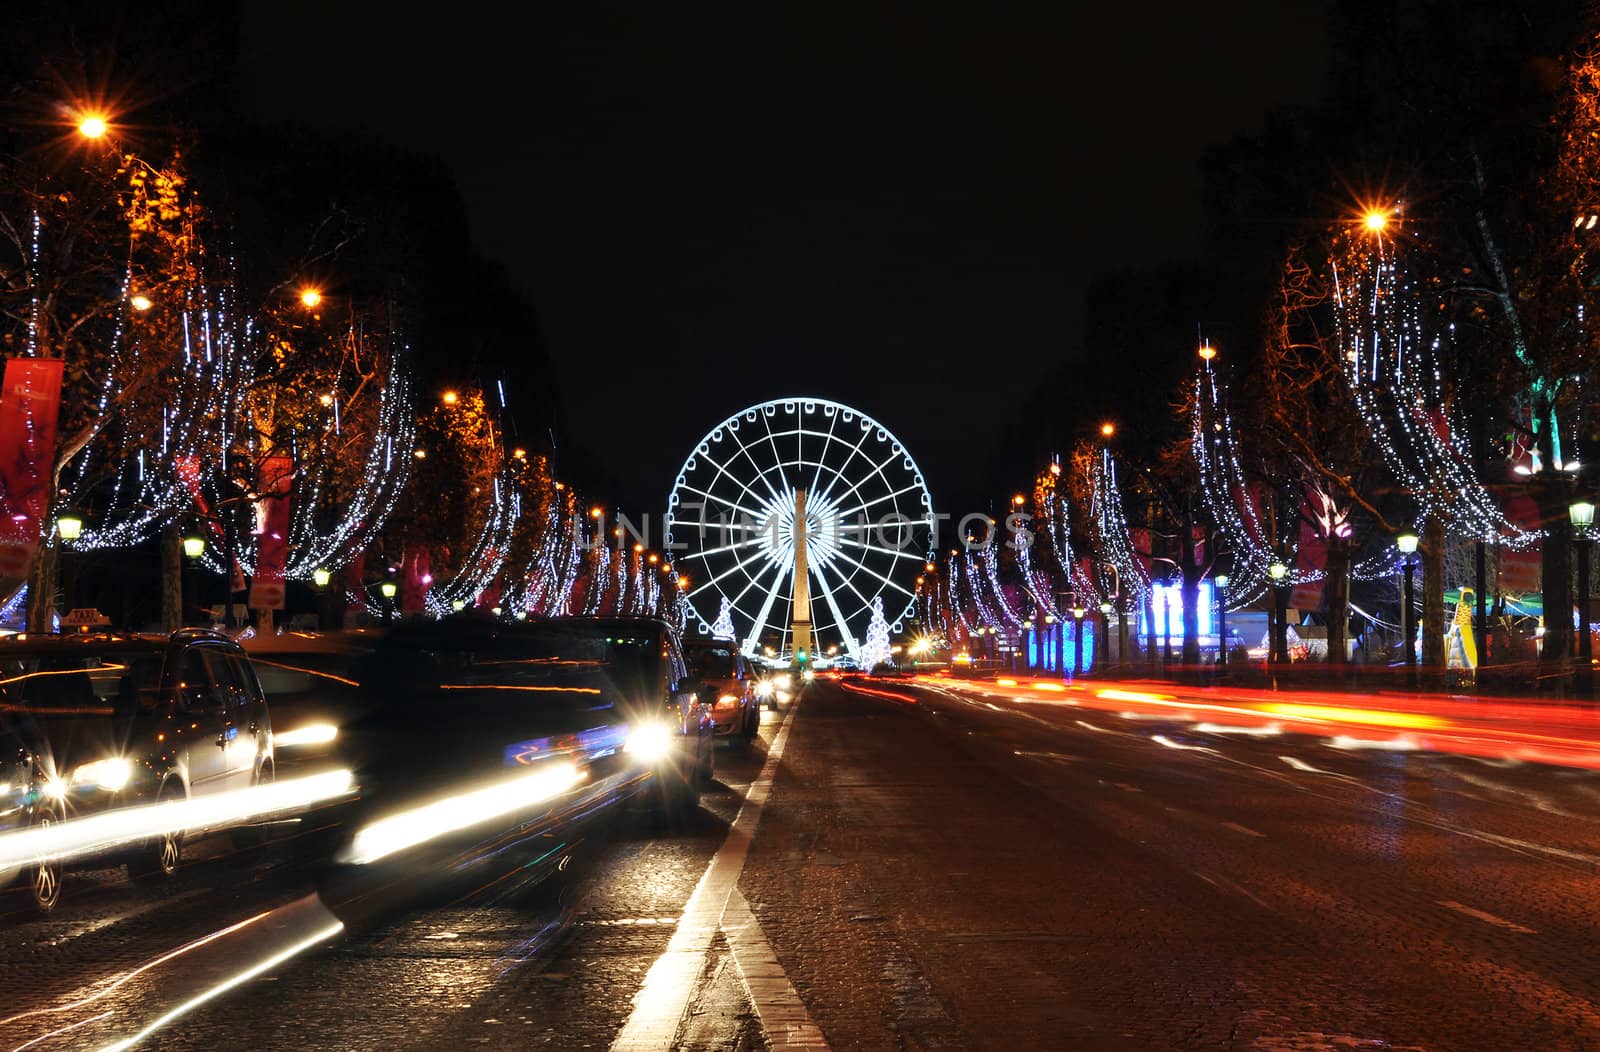 The Champs-Elysees avenue illuminated for Christmas by dutourdumonde